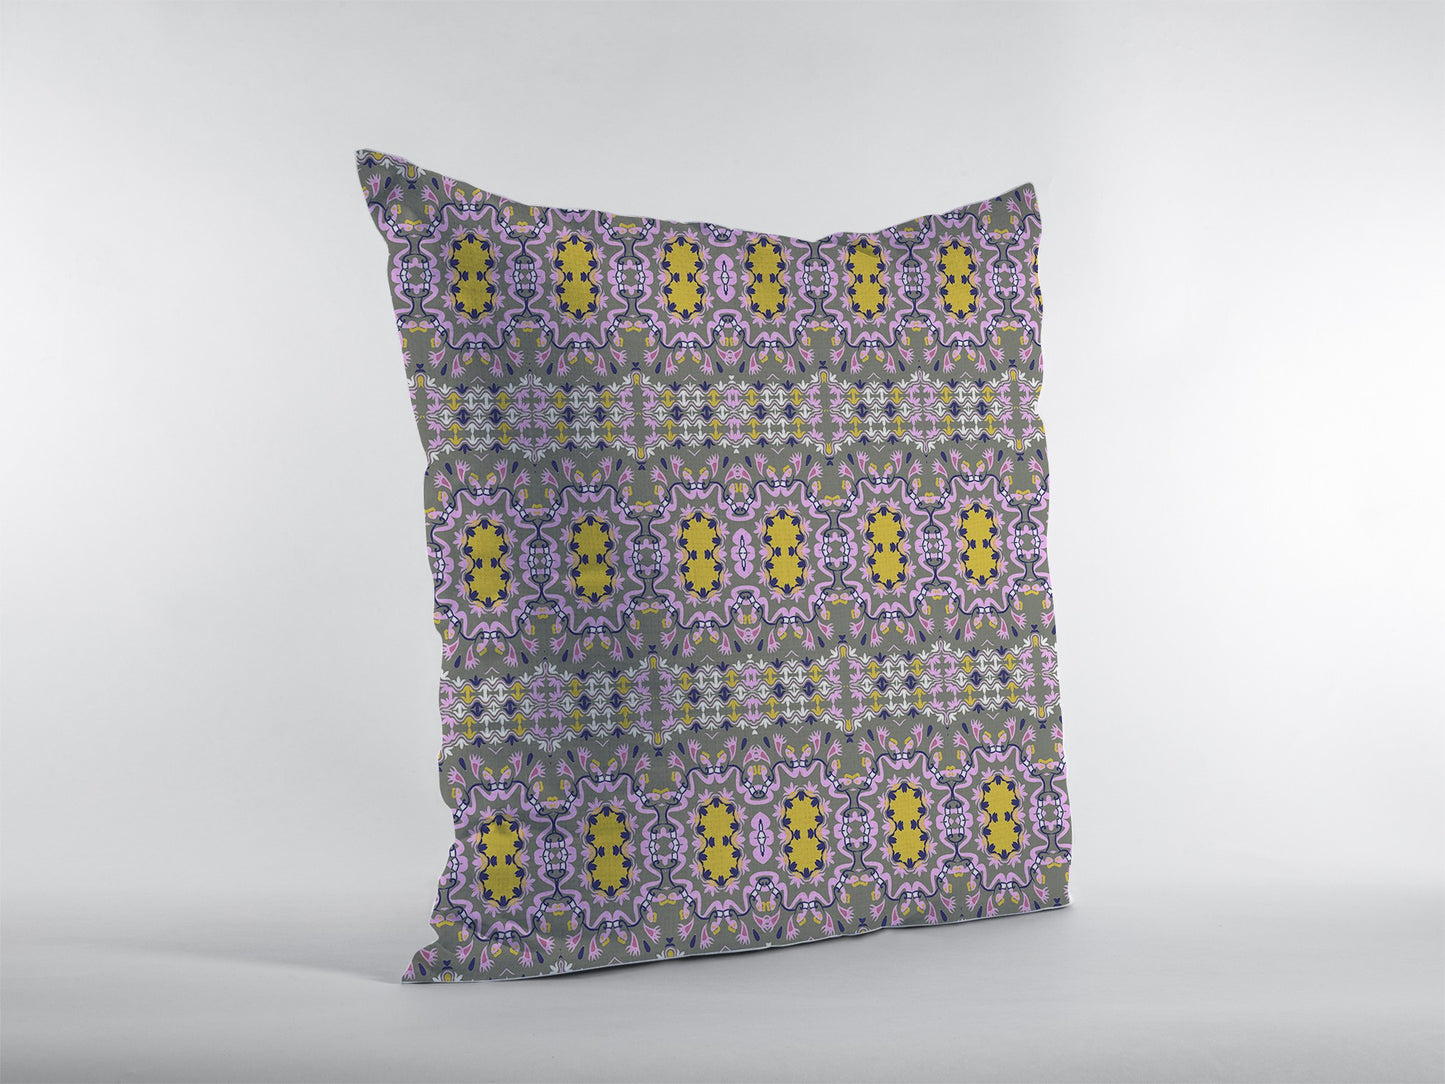 16” Purple Yellow Geofloral Zippered Suede Throw Pillow